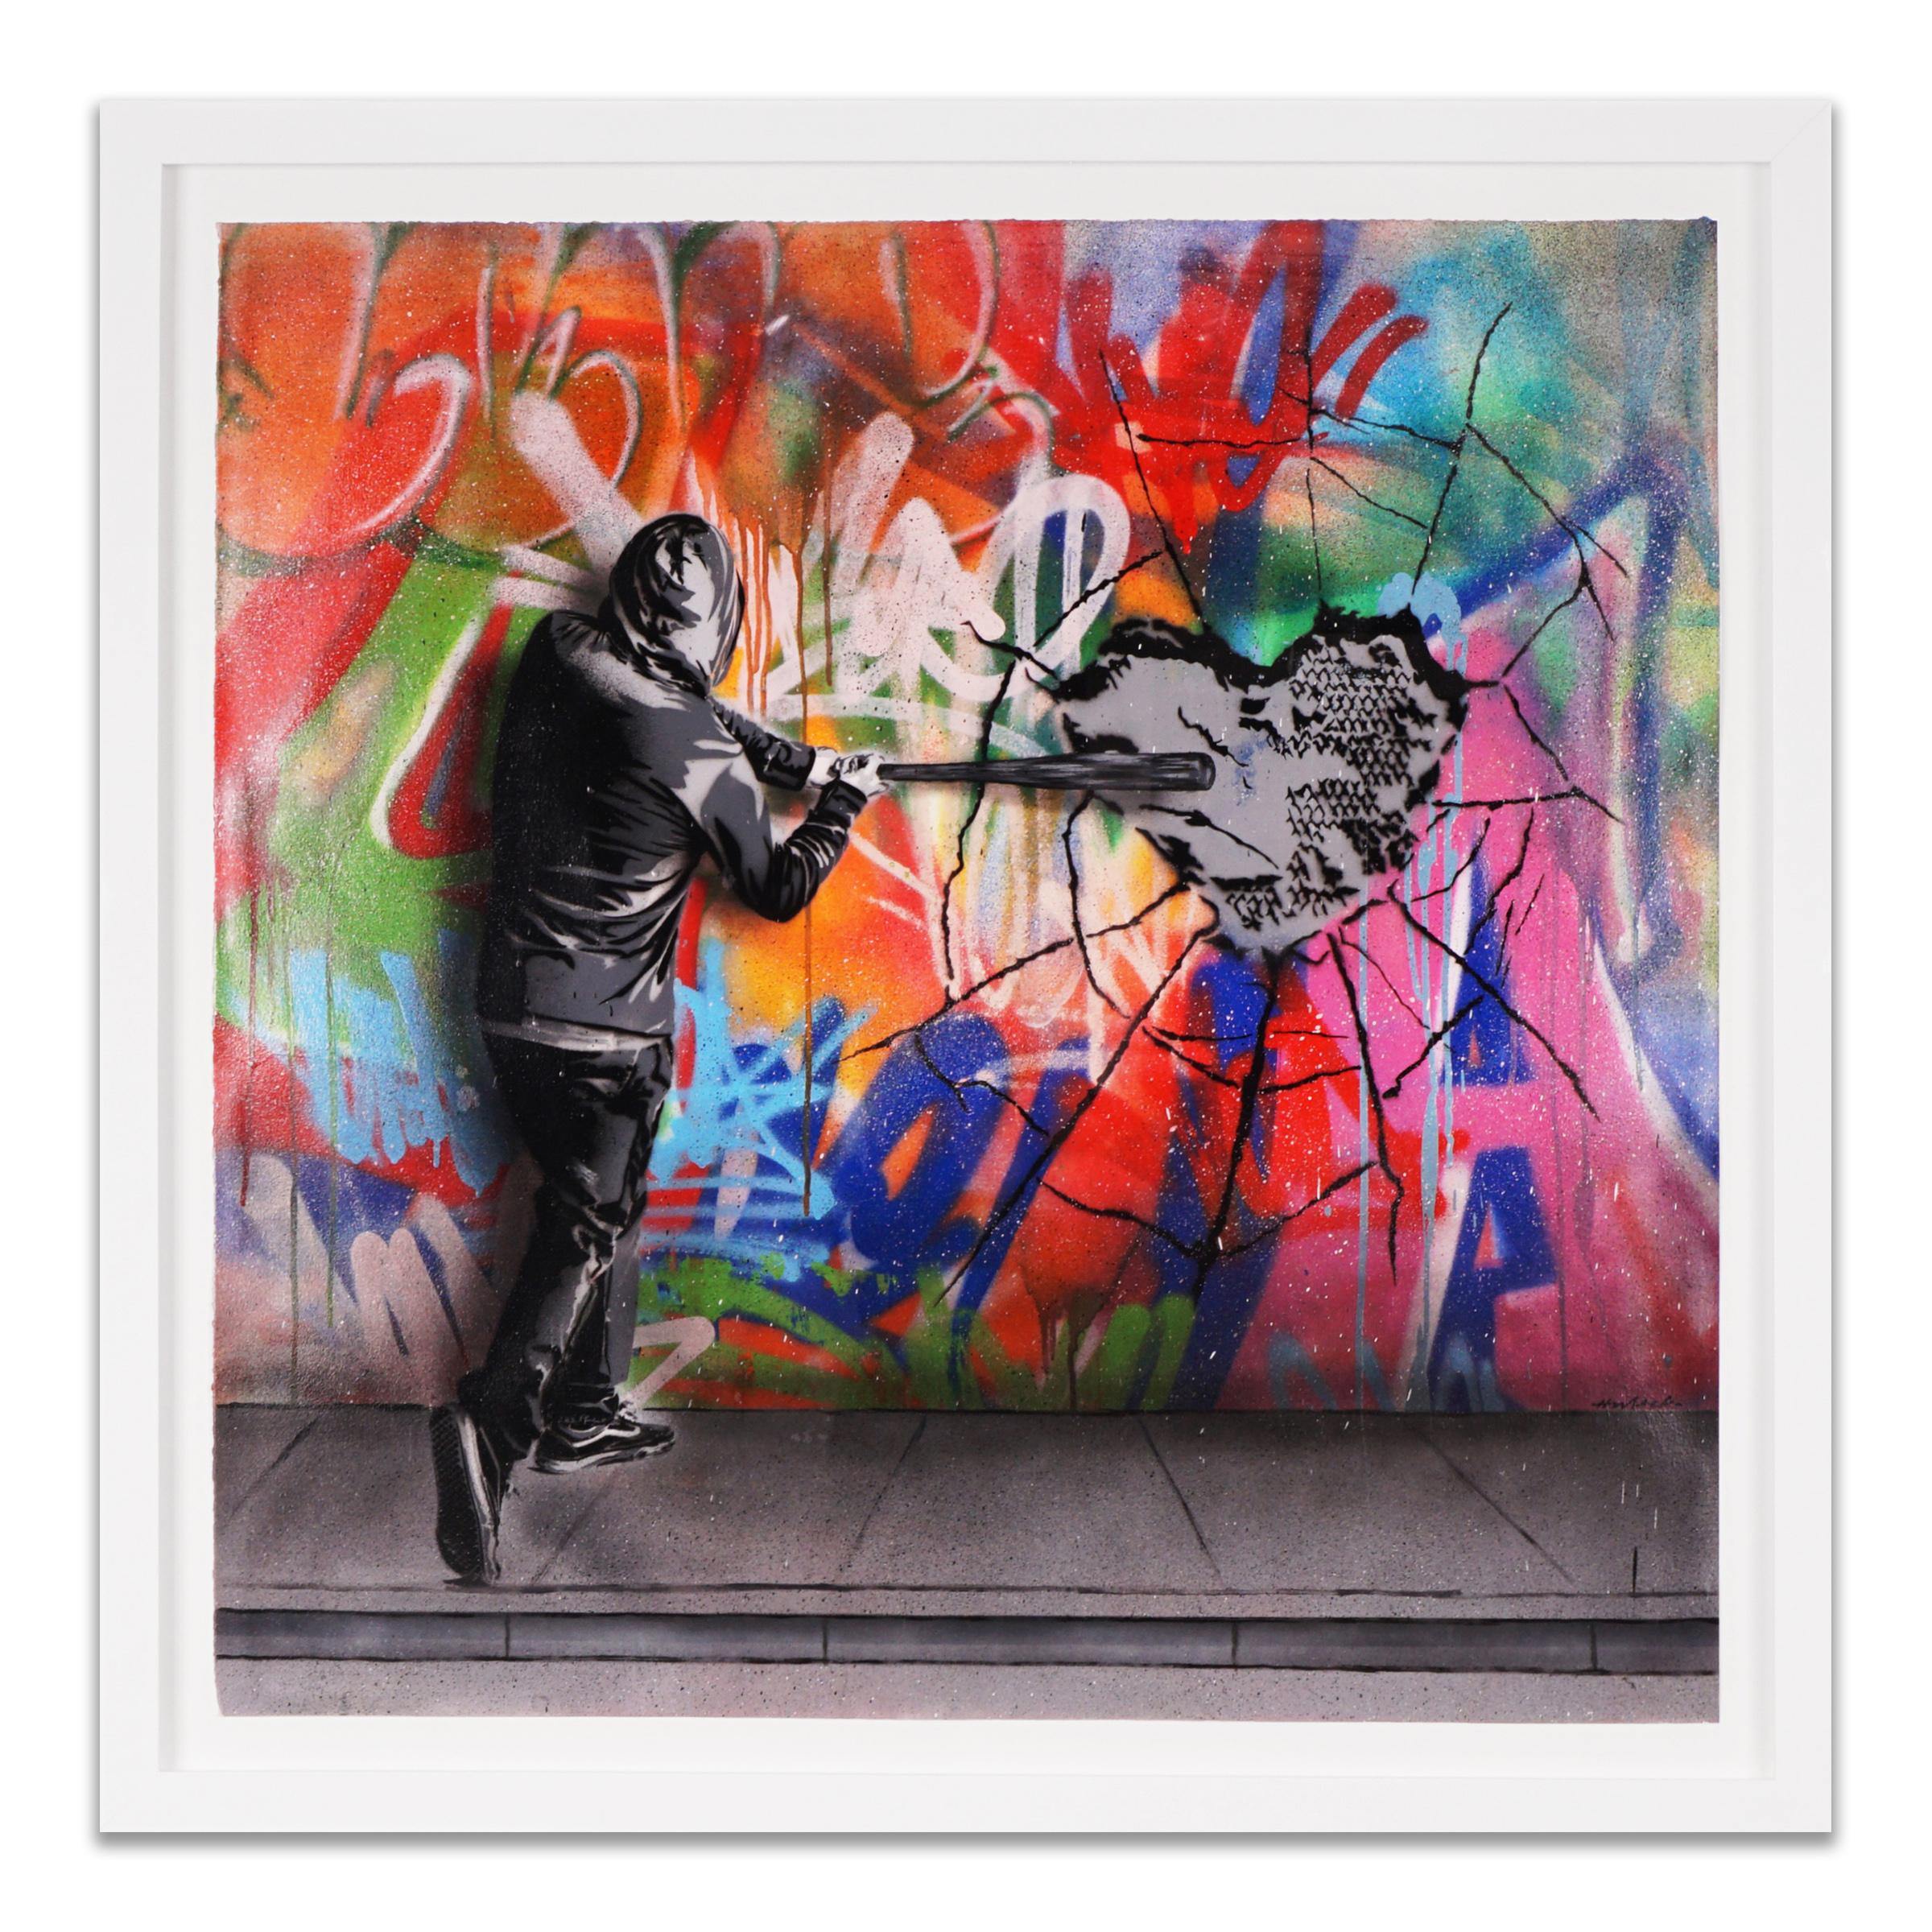 The brightly saturated graffiti style 'Breaking Heart' painting on paper by Hijack is a unique acrylic, stencil, and spray paint work created in 2021. This powerful work possesses a 3D effect with vibrant details and high contras elements. Acrylic